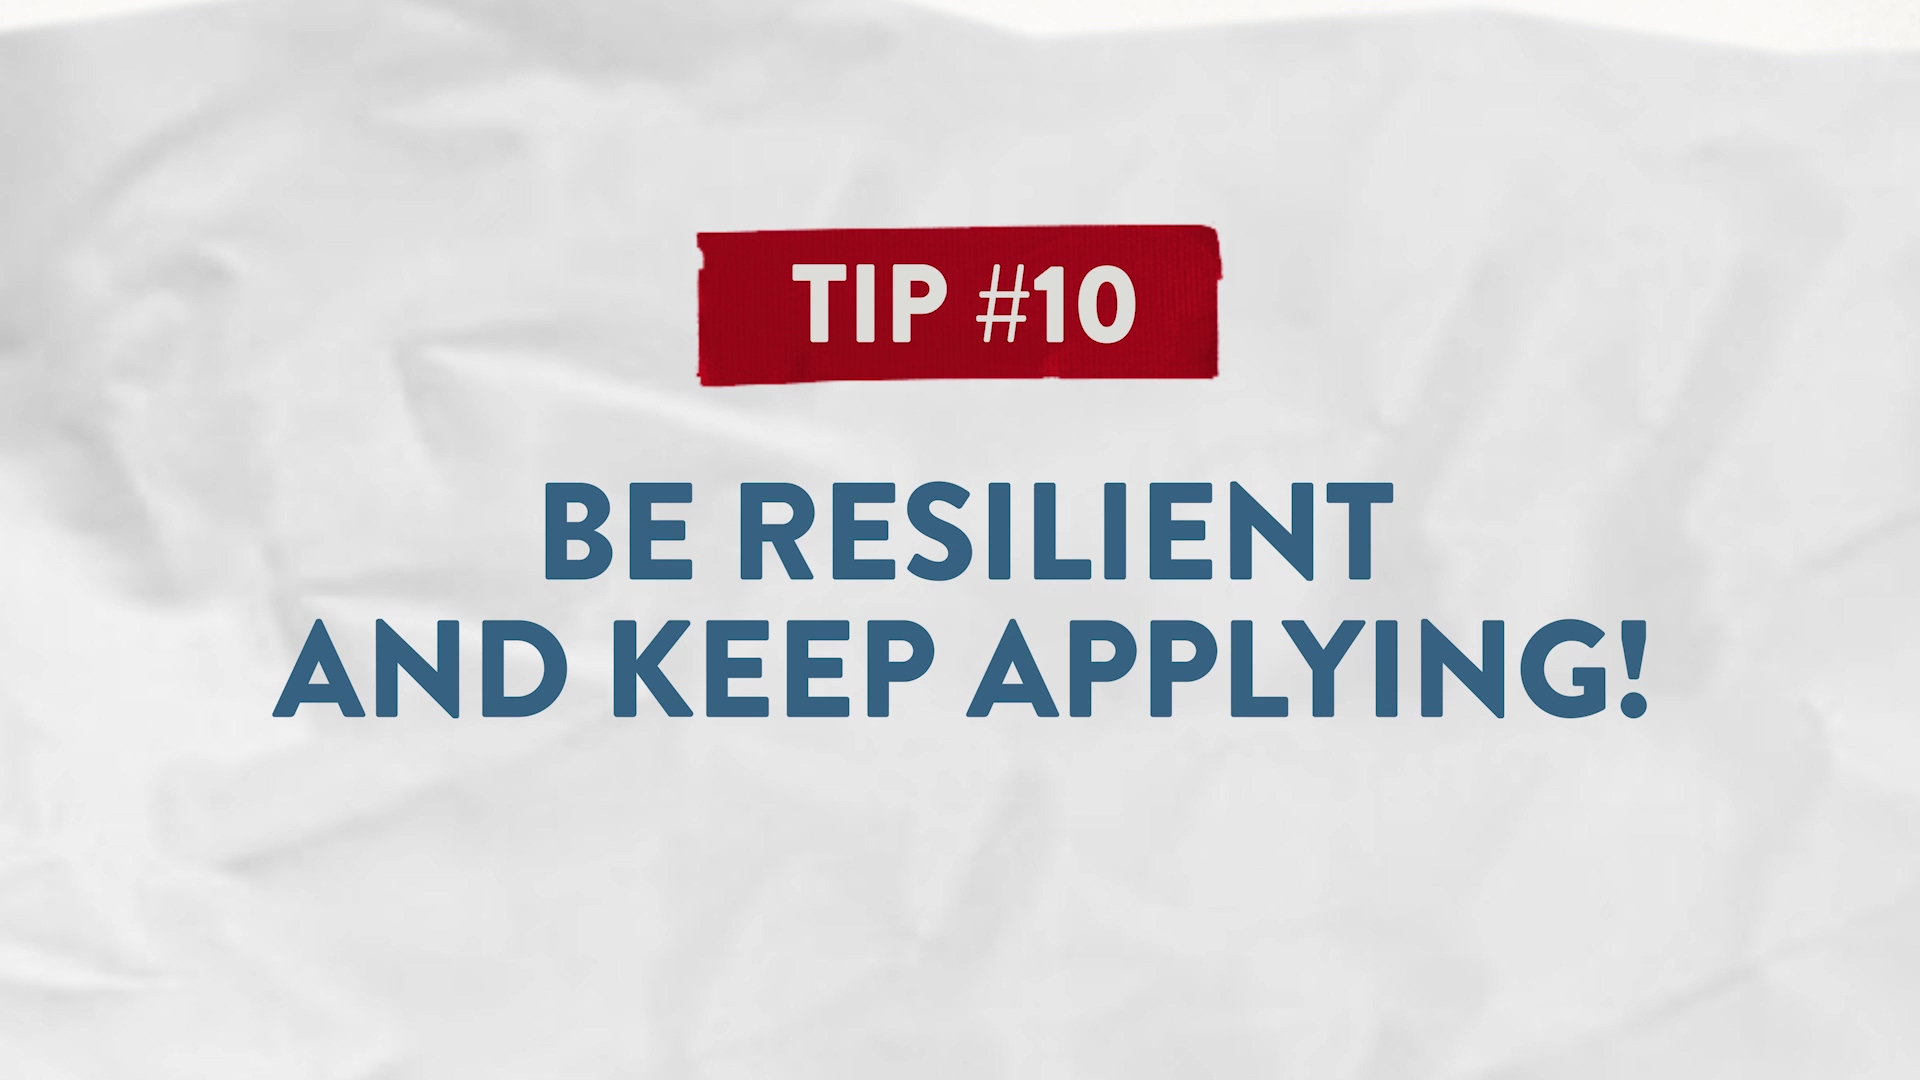 Tip #10 Be Resilient and Keep Applying